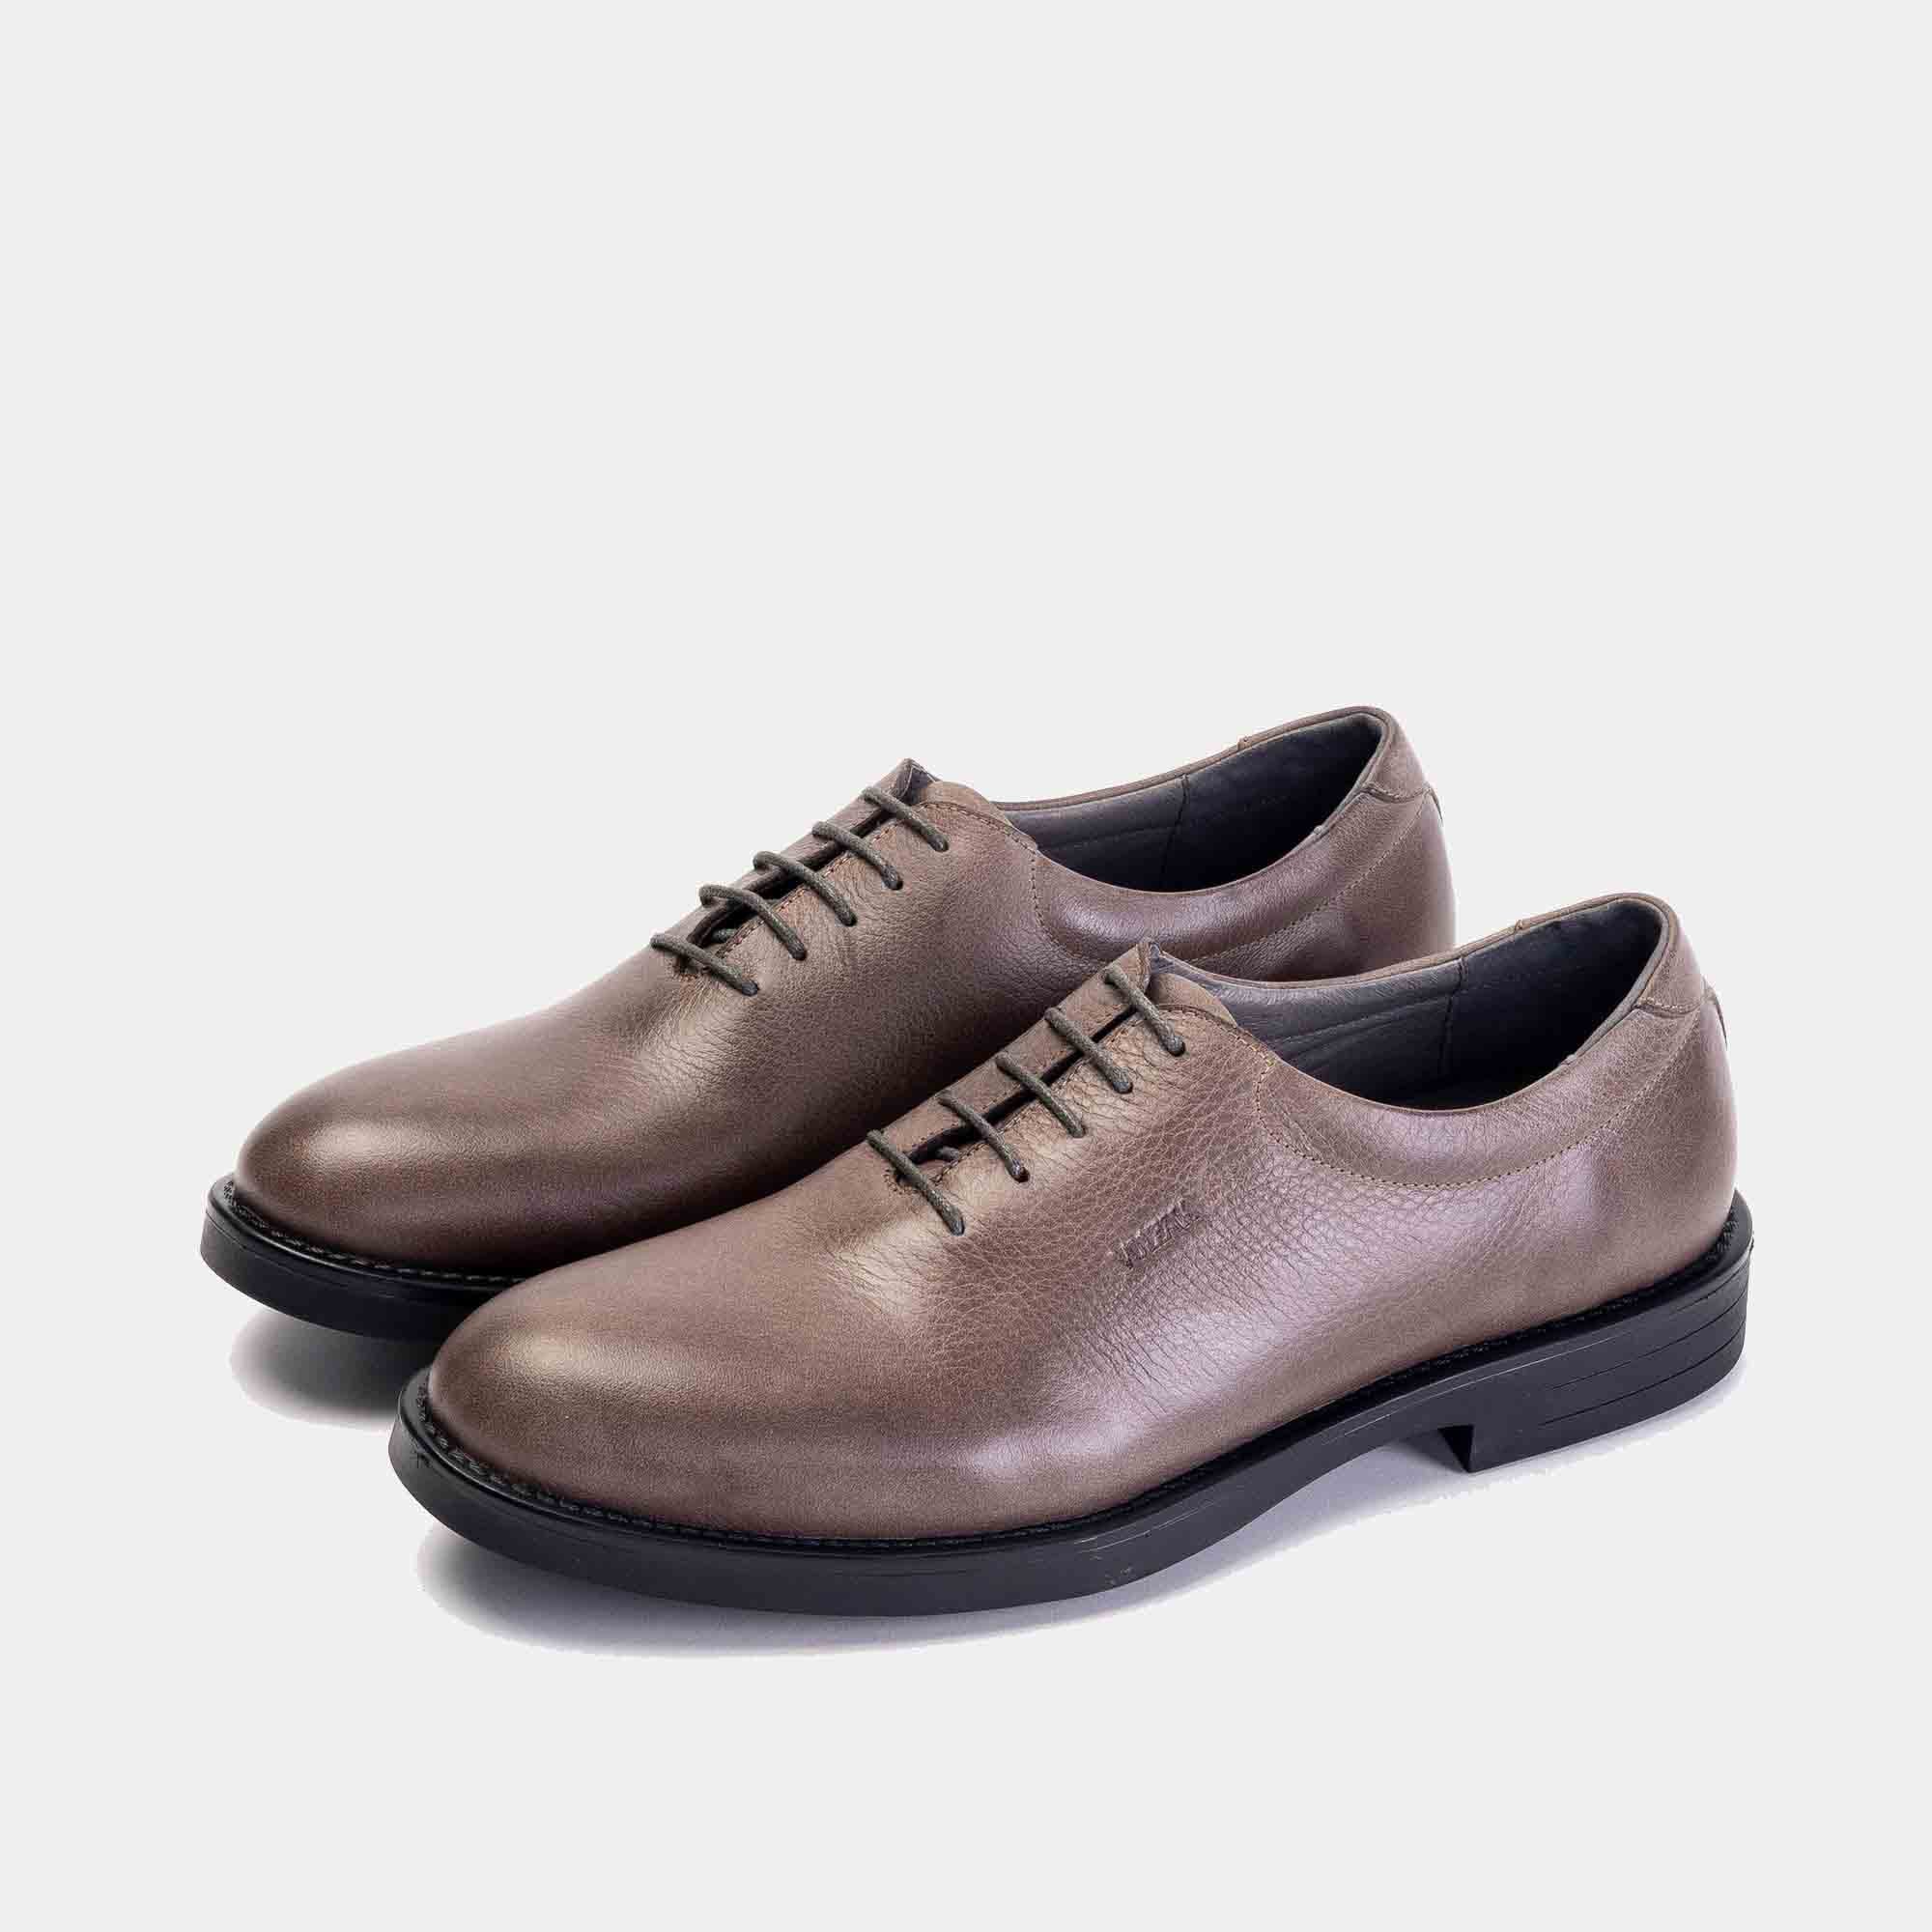 '2188 Chaussure cuir Taupe